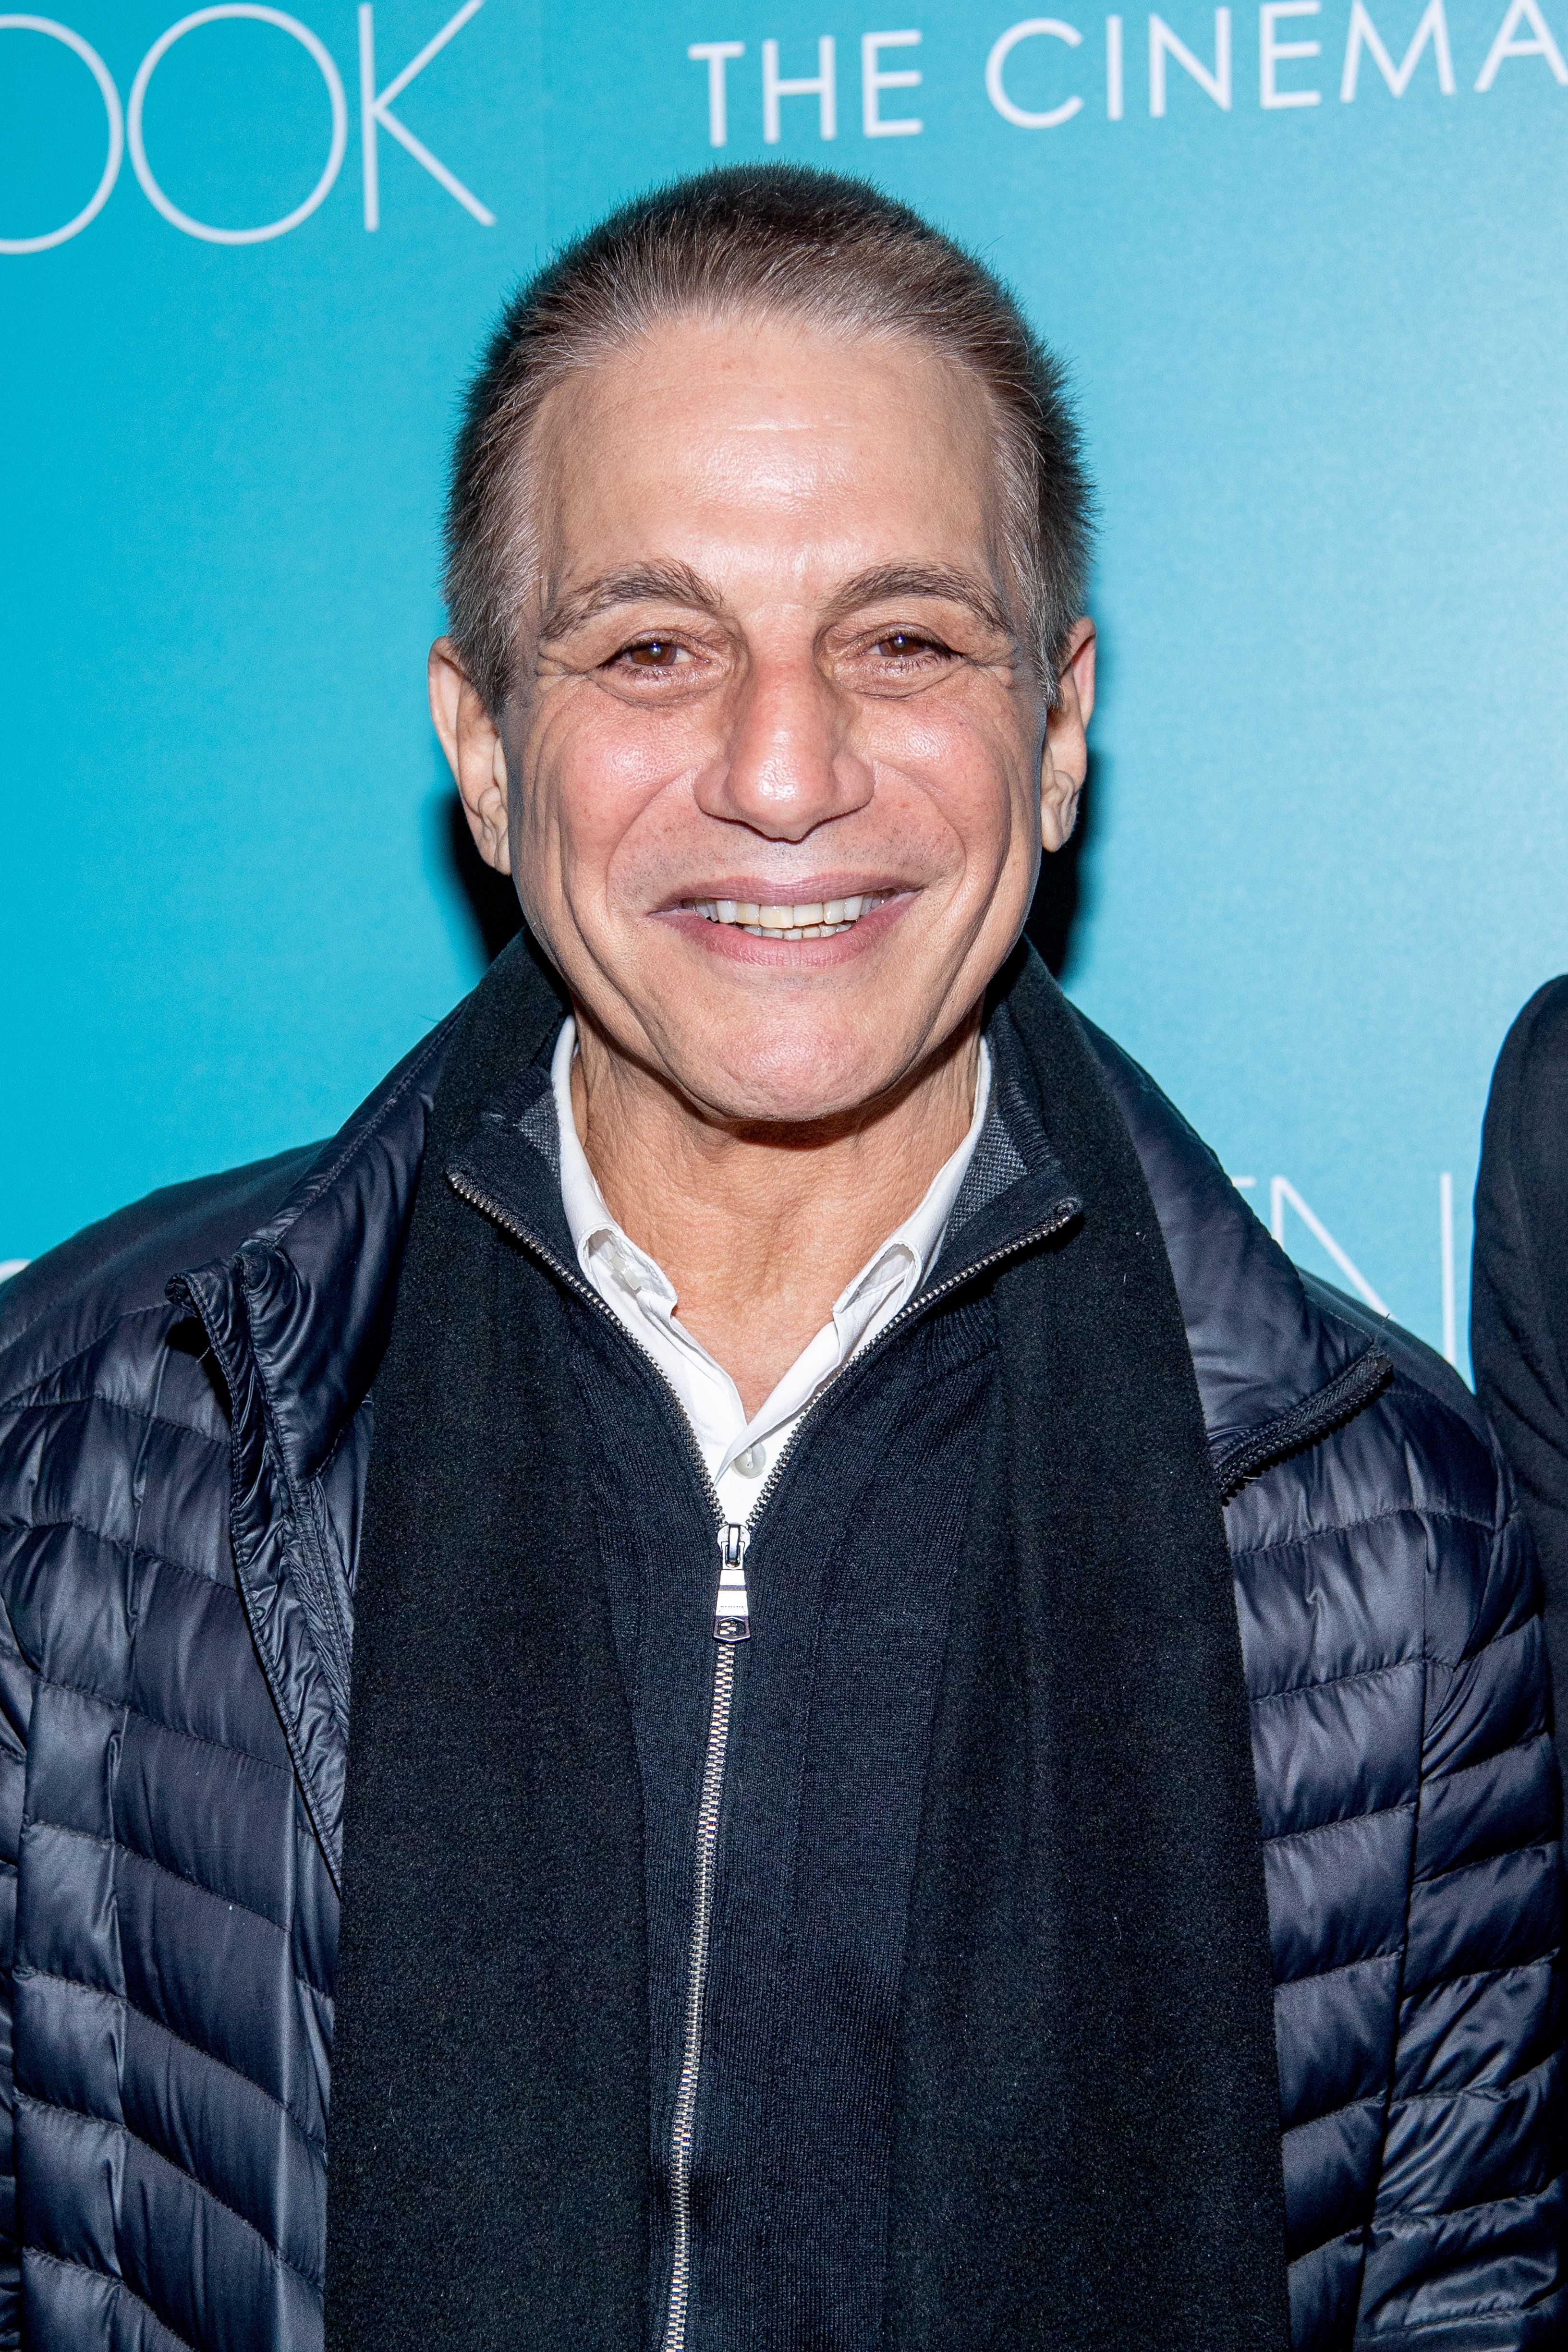 What happened to Tony Danza after the show Who's the Boss ended